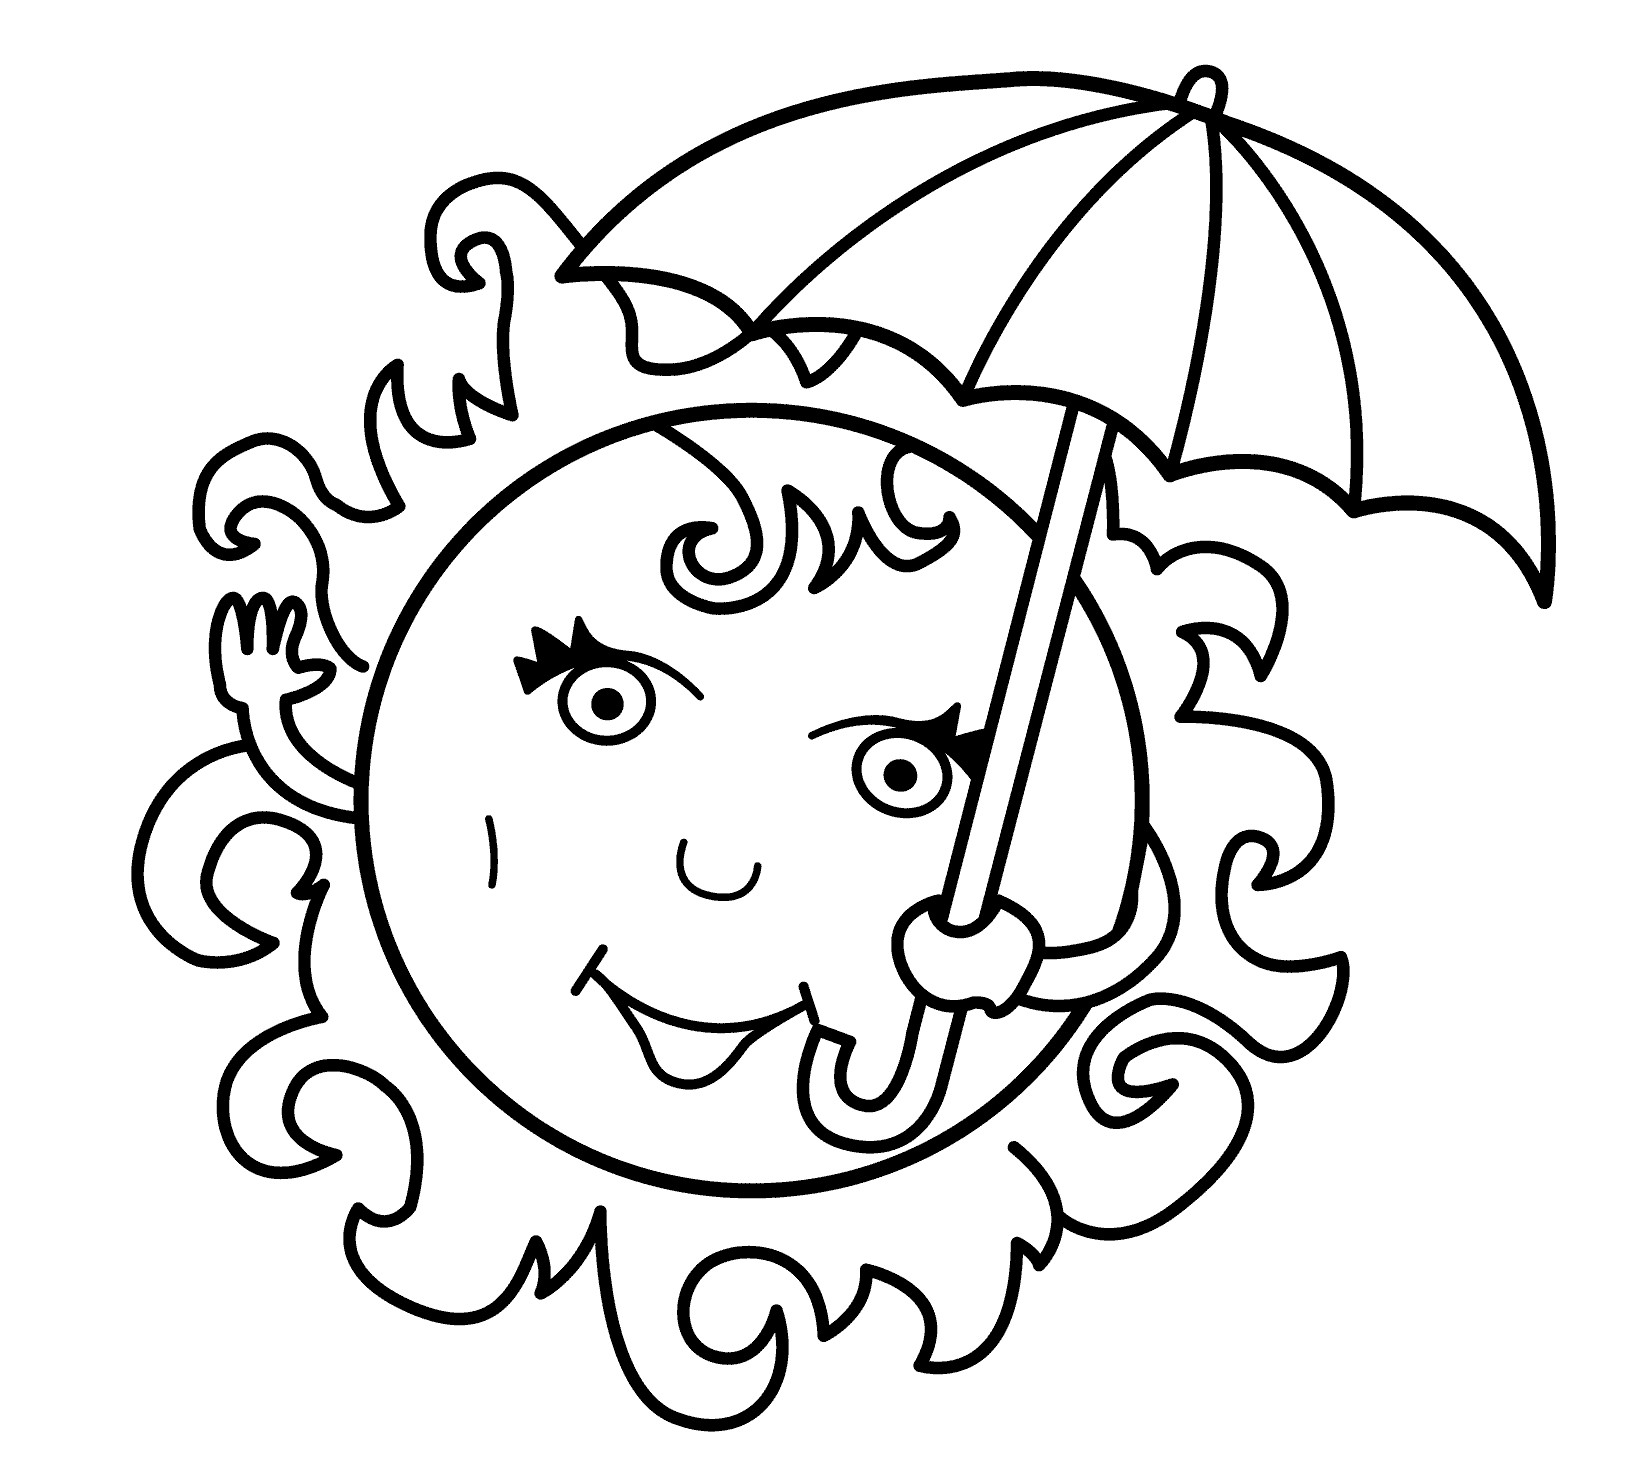 Download Coloring Pages For Kids
 Download Free Printable Summer Coloring Pages for Kids